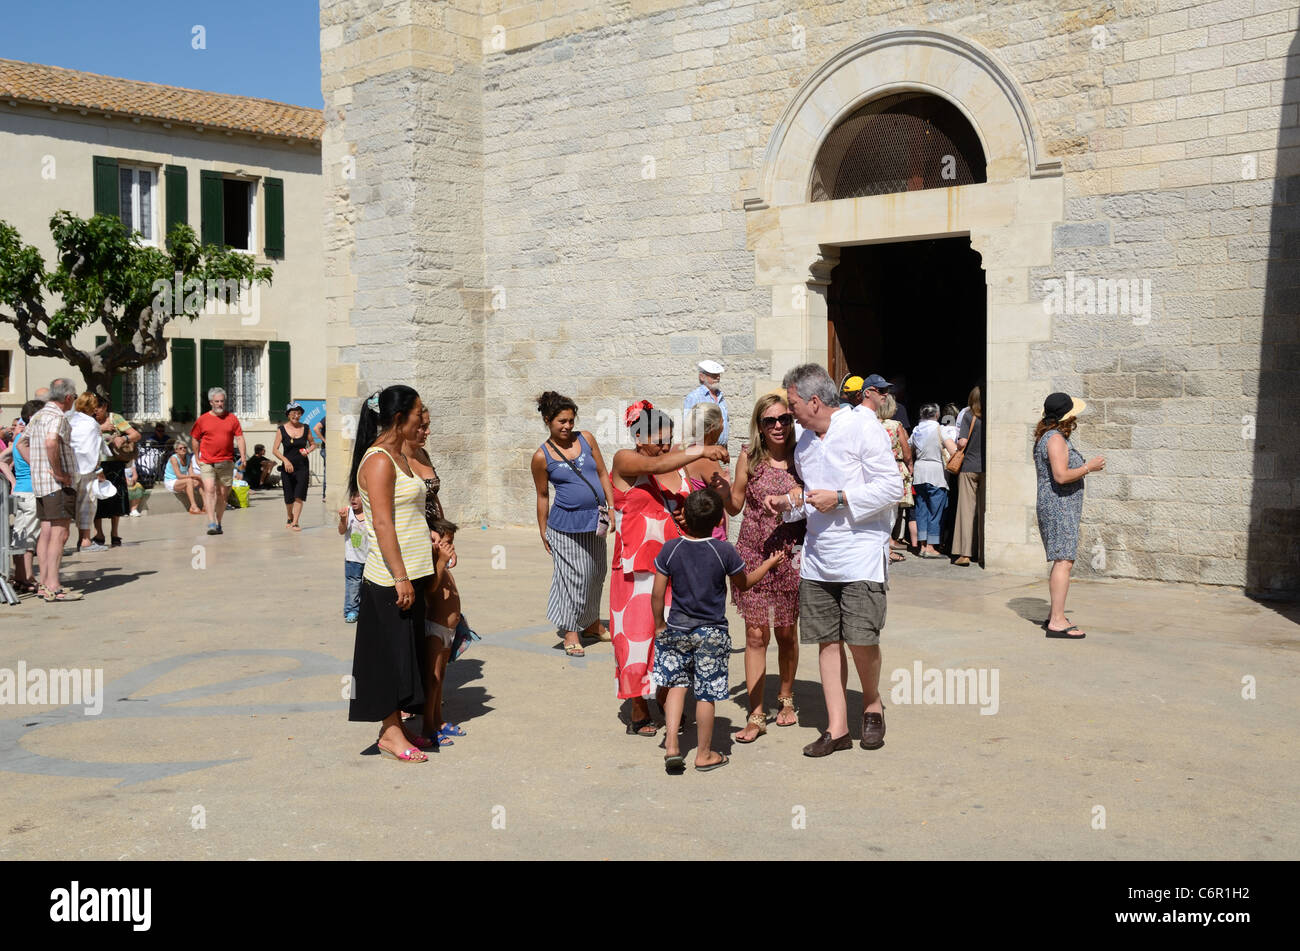 Gypsies or Roma Selling Trinkets to Tourists Outside the Fortified Church of Les Saintes-Maries-de-la-Mer Camargue Provence France Stock Photo